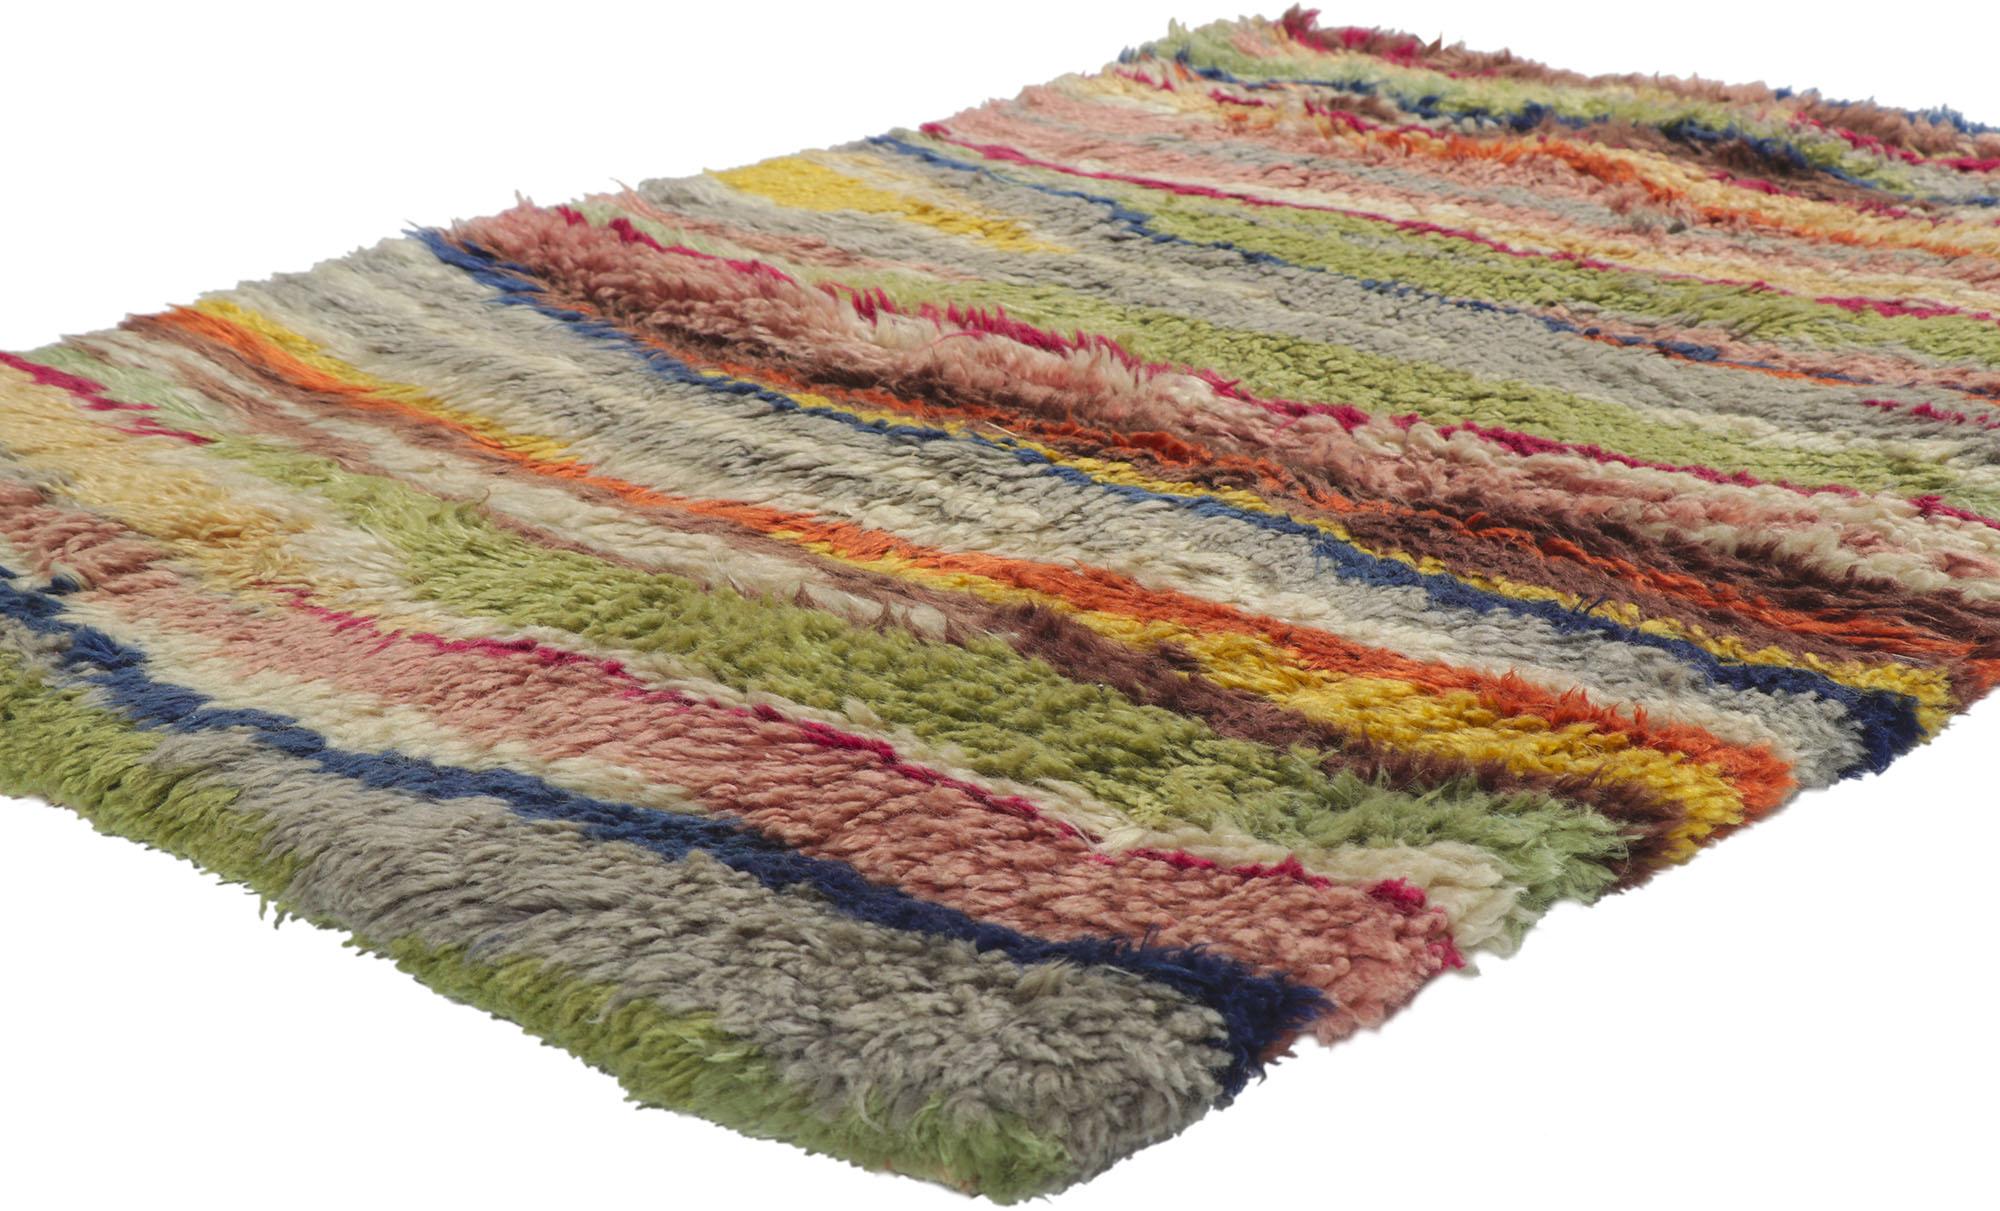 78165 Vintage Swedish Rya Stripe Overlay Rug with Abstract Expressionist Style 03'08 x 04'11. Full of tiny details and a bold expressive design combined with abstract expressionist style, this hand-knotted wool vintage Swedish Ryijy Rya rug is a